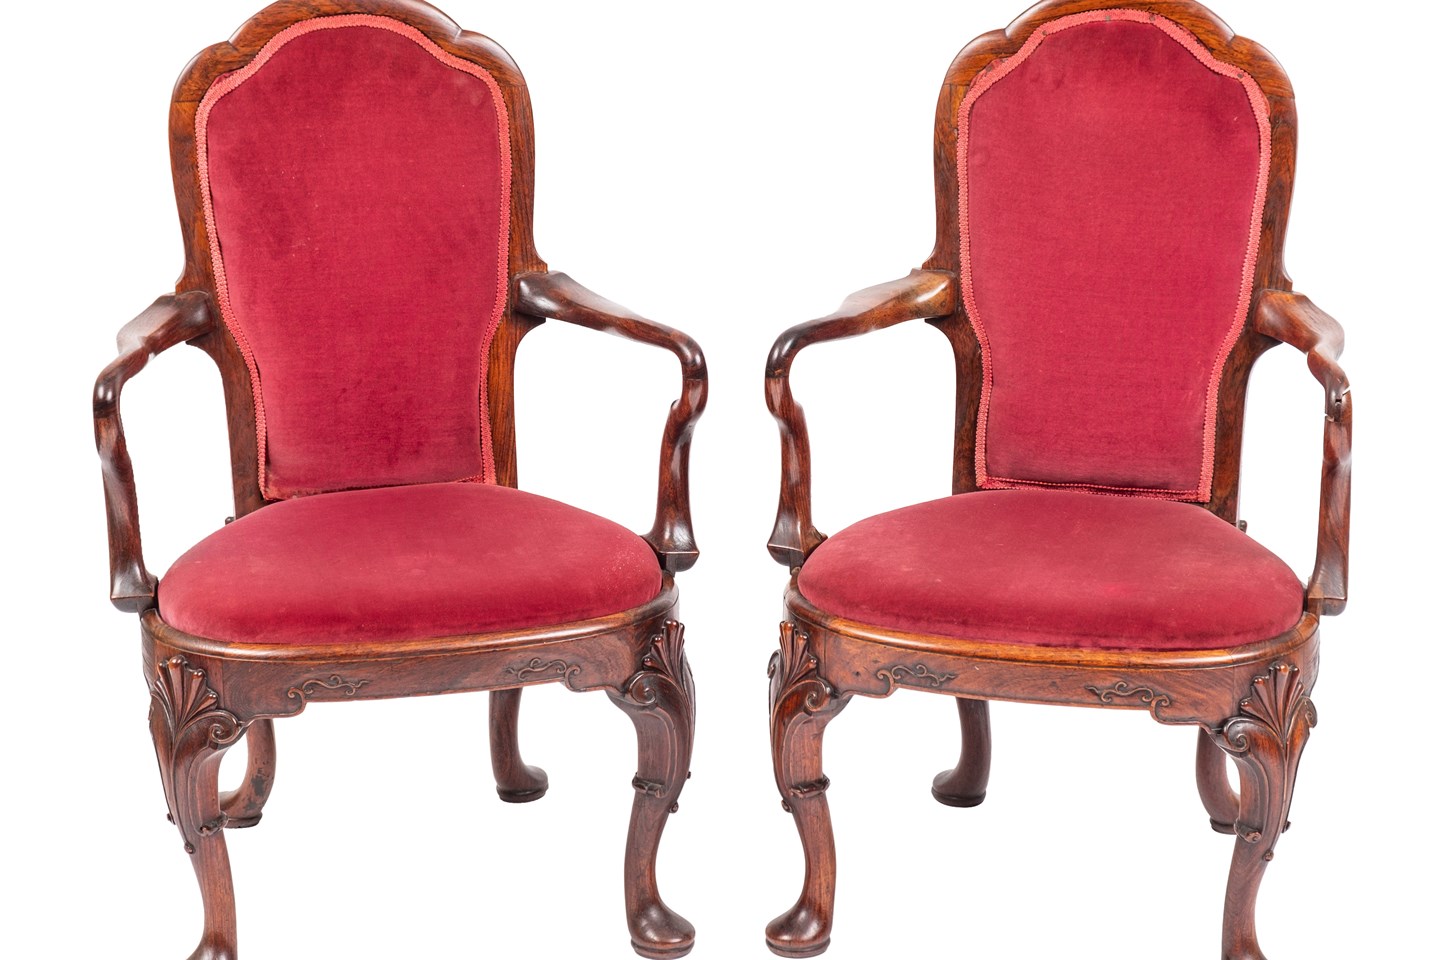 18th Century Anglo-Chinese open armchairs